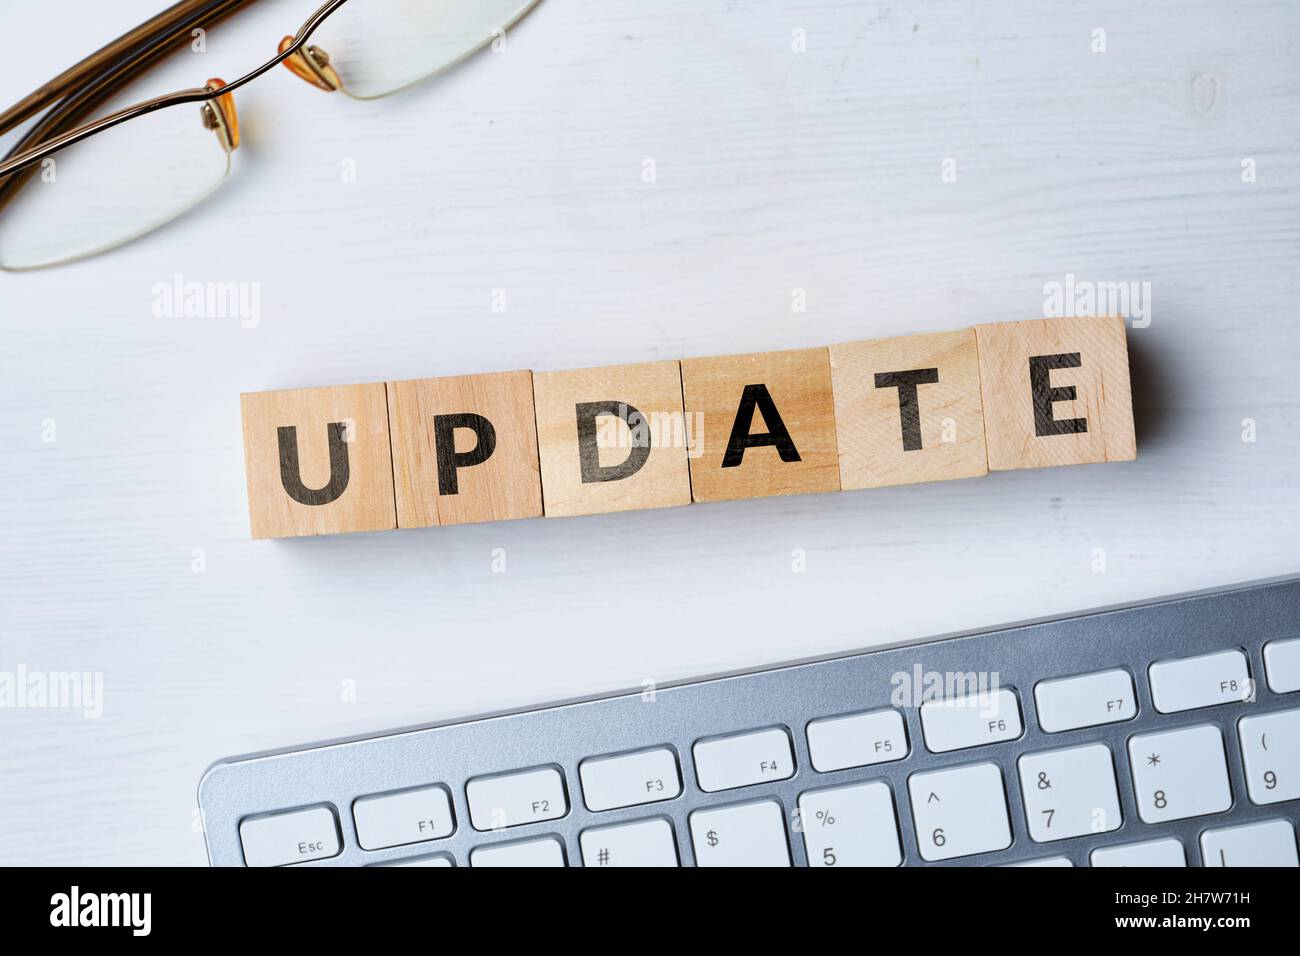 The concept of software update written on wooden cubes next to the keyboard Stock Photo